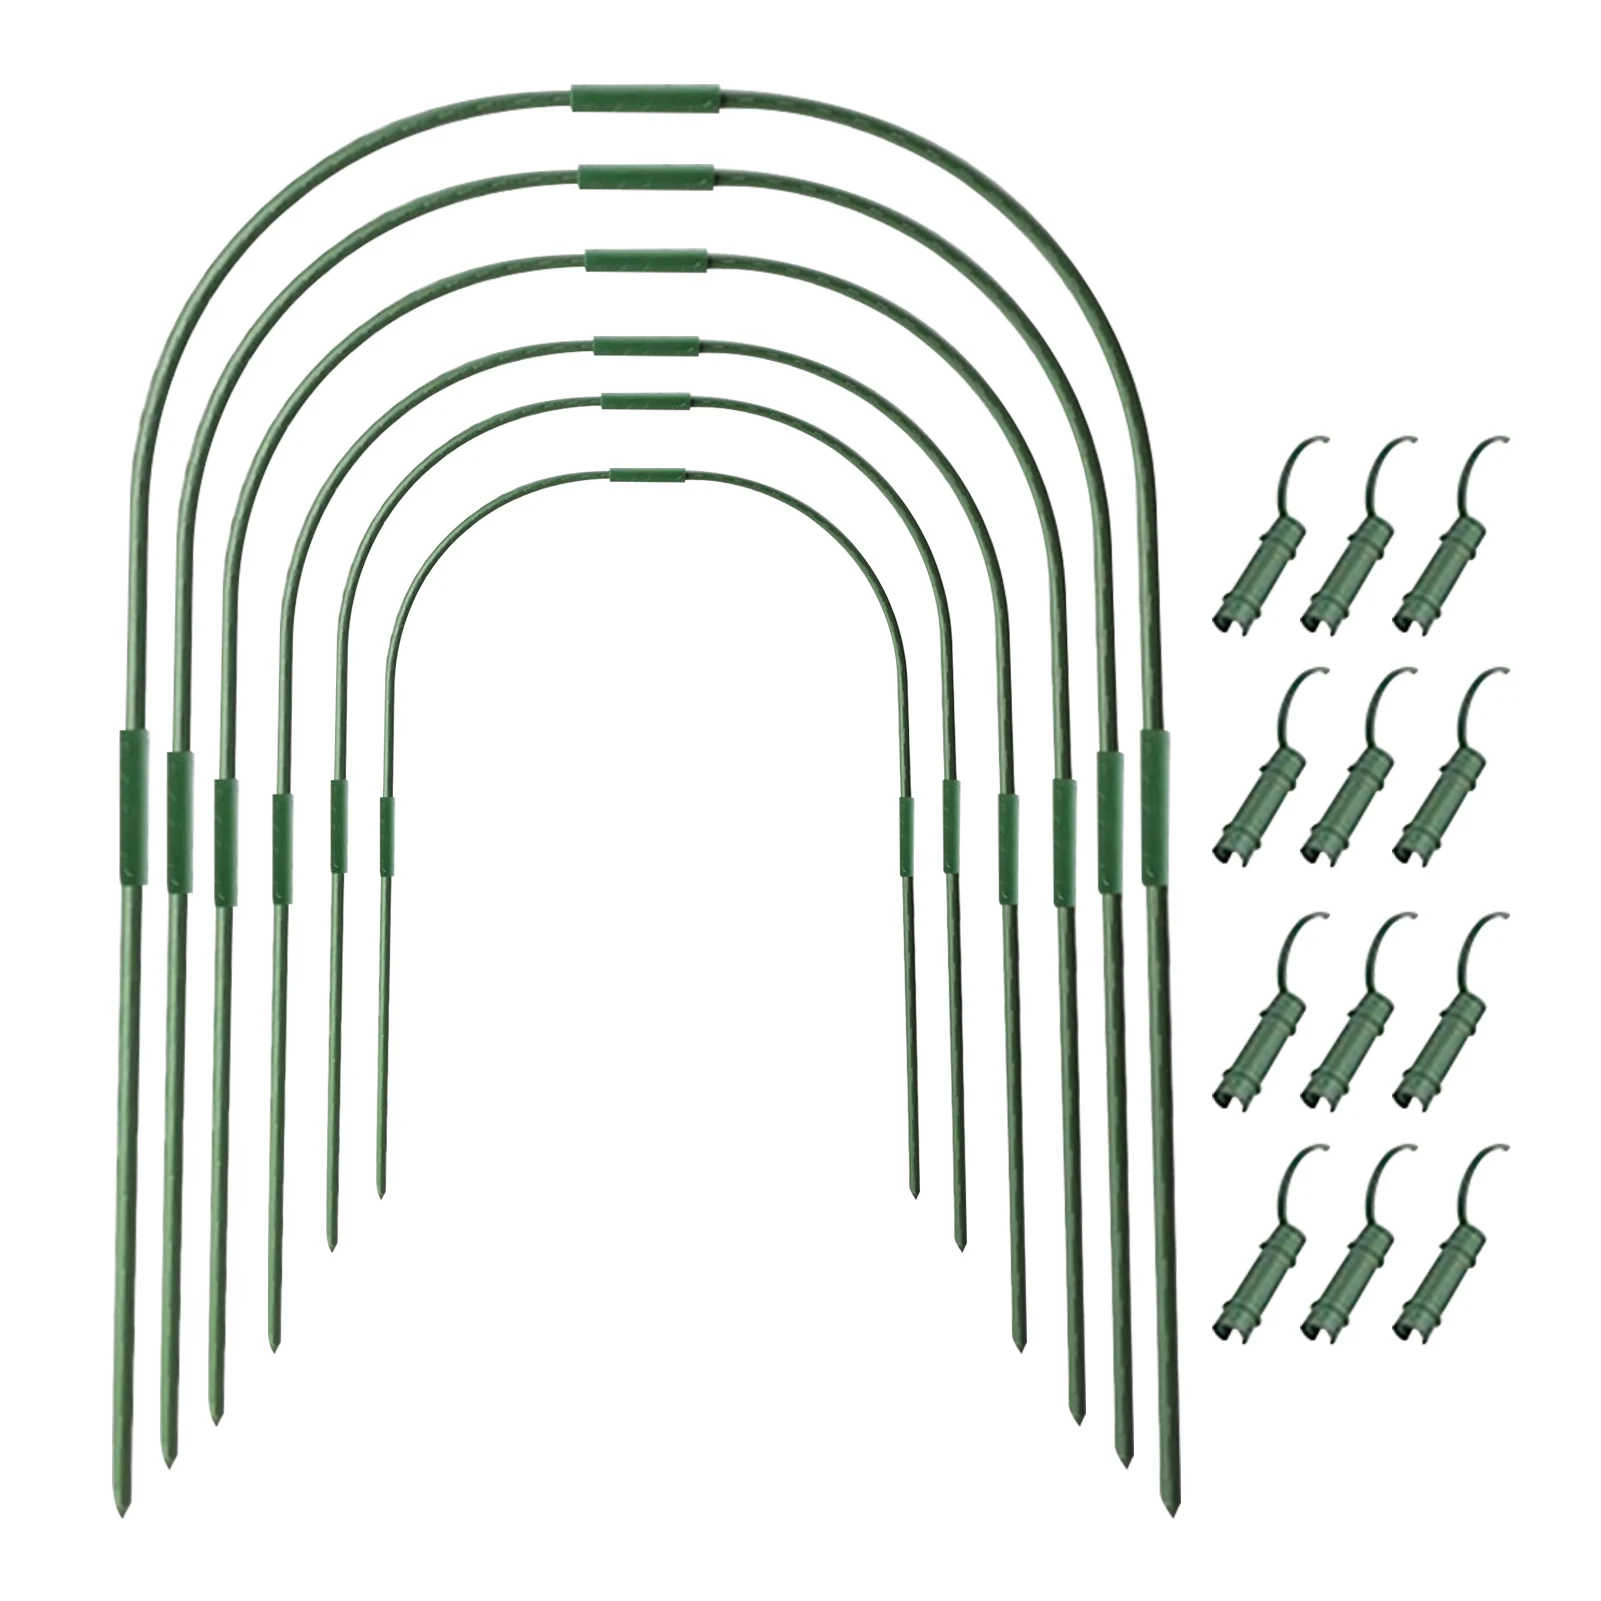 

54pcs Tunnel DIY Steel Plant Support Connector Frame Protective Growing Row Cover Clip Garden Stakes Sturdy Greenhouse Hoop Set